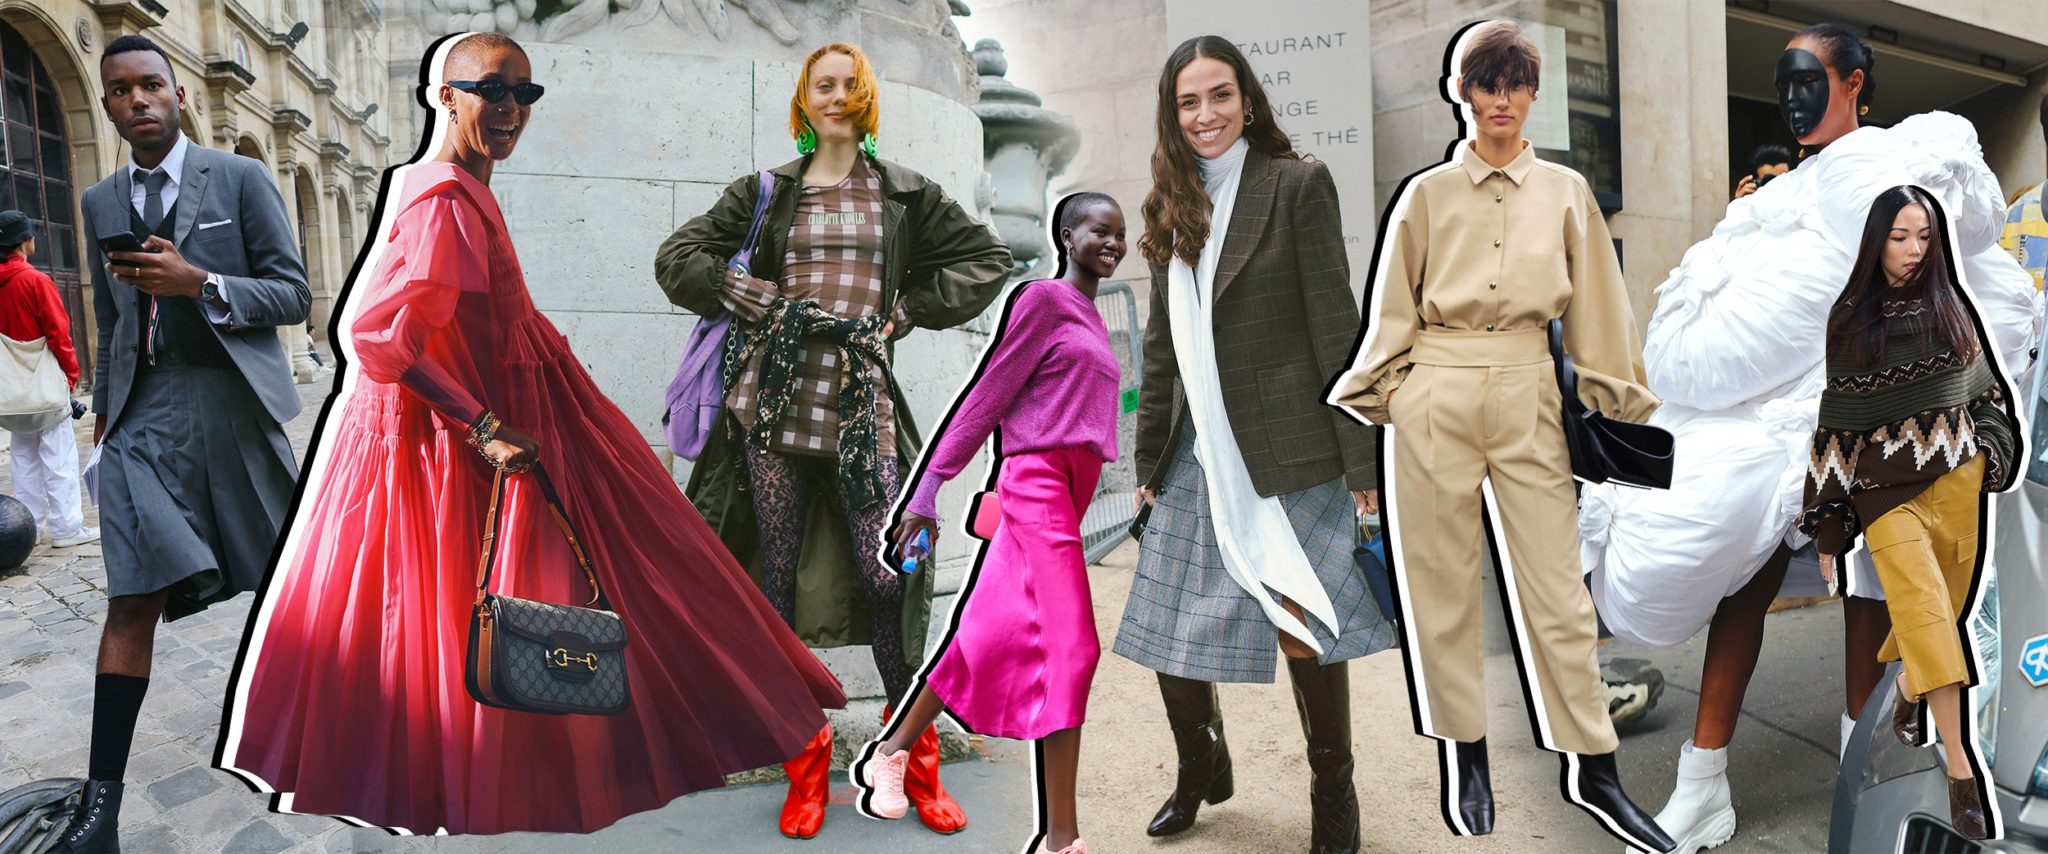 The 8 Biggest Street Style Trends Of The Spring 2020 Season